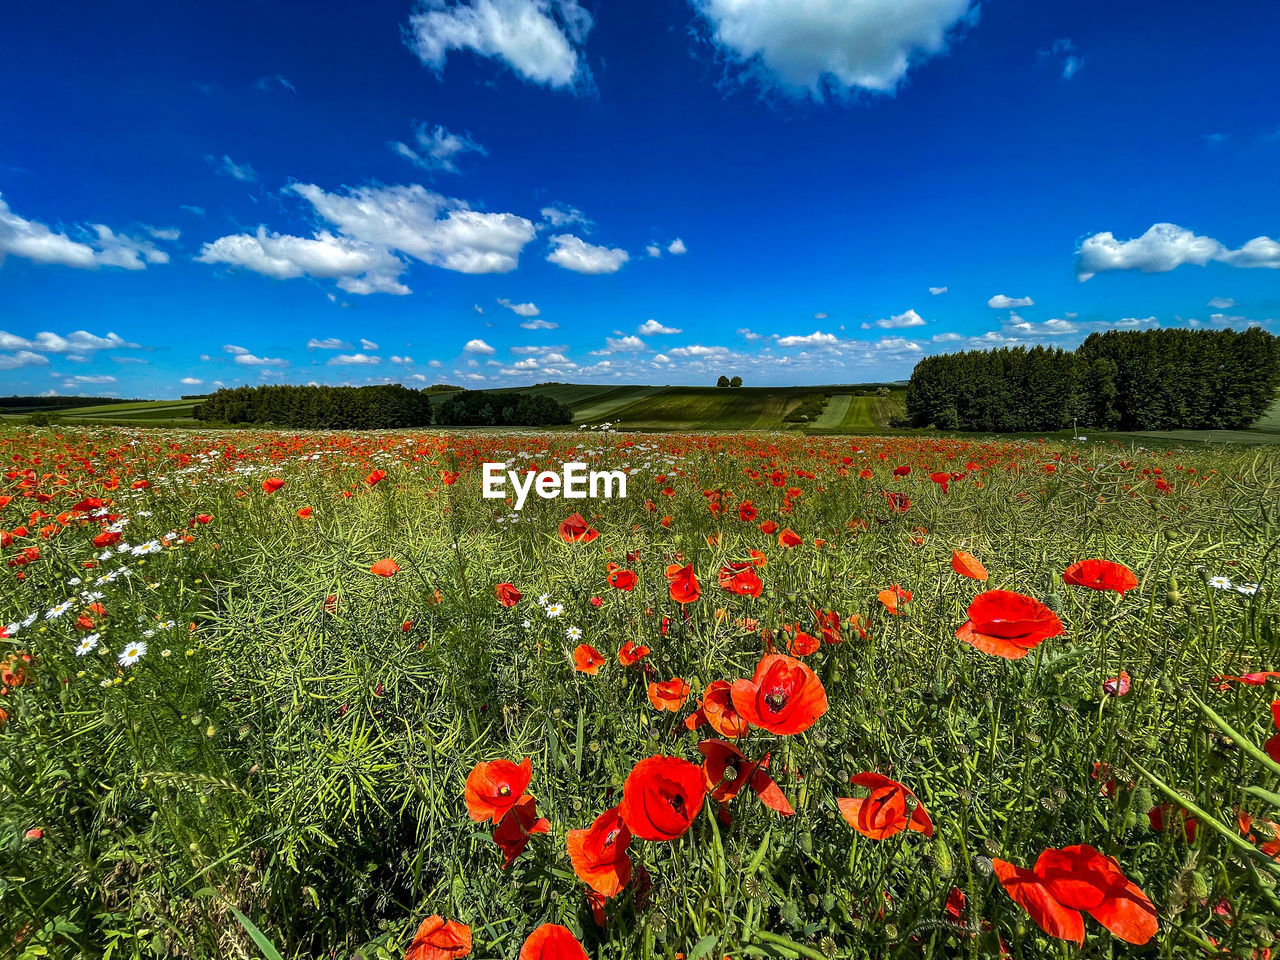 scenic view of flowering plants on field against sky